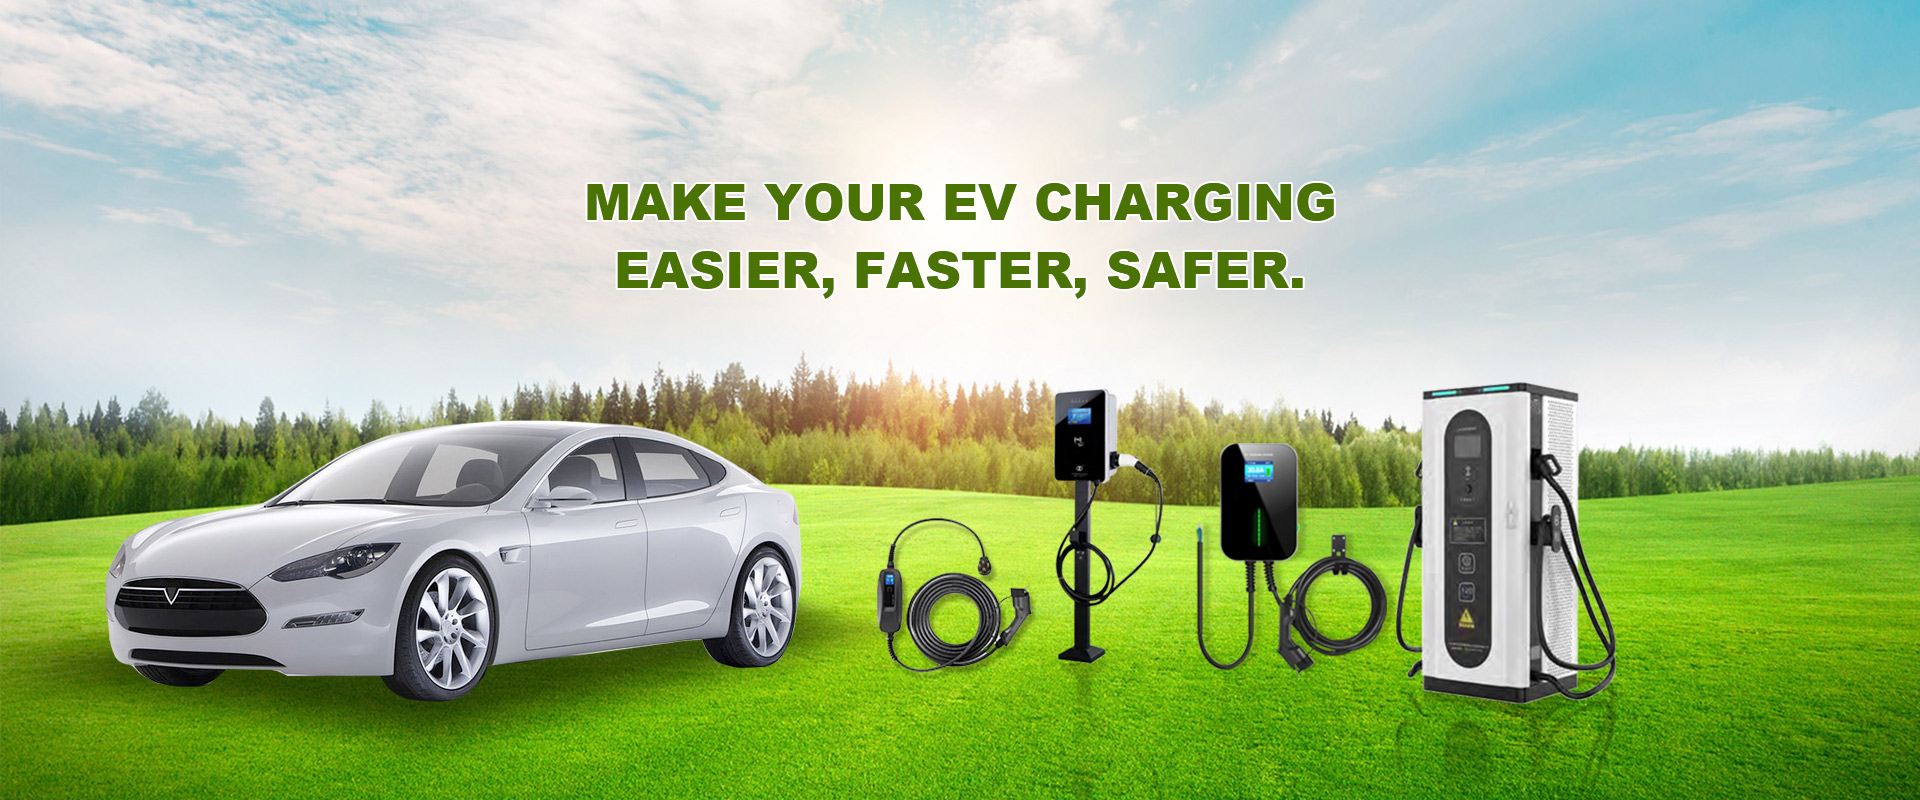 banner-jt-mobility-ev-charging-cable-portable-charger-manufacturer-supplier-distributor-india-3